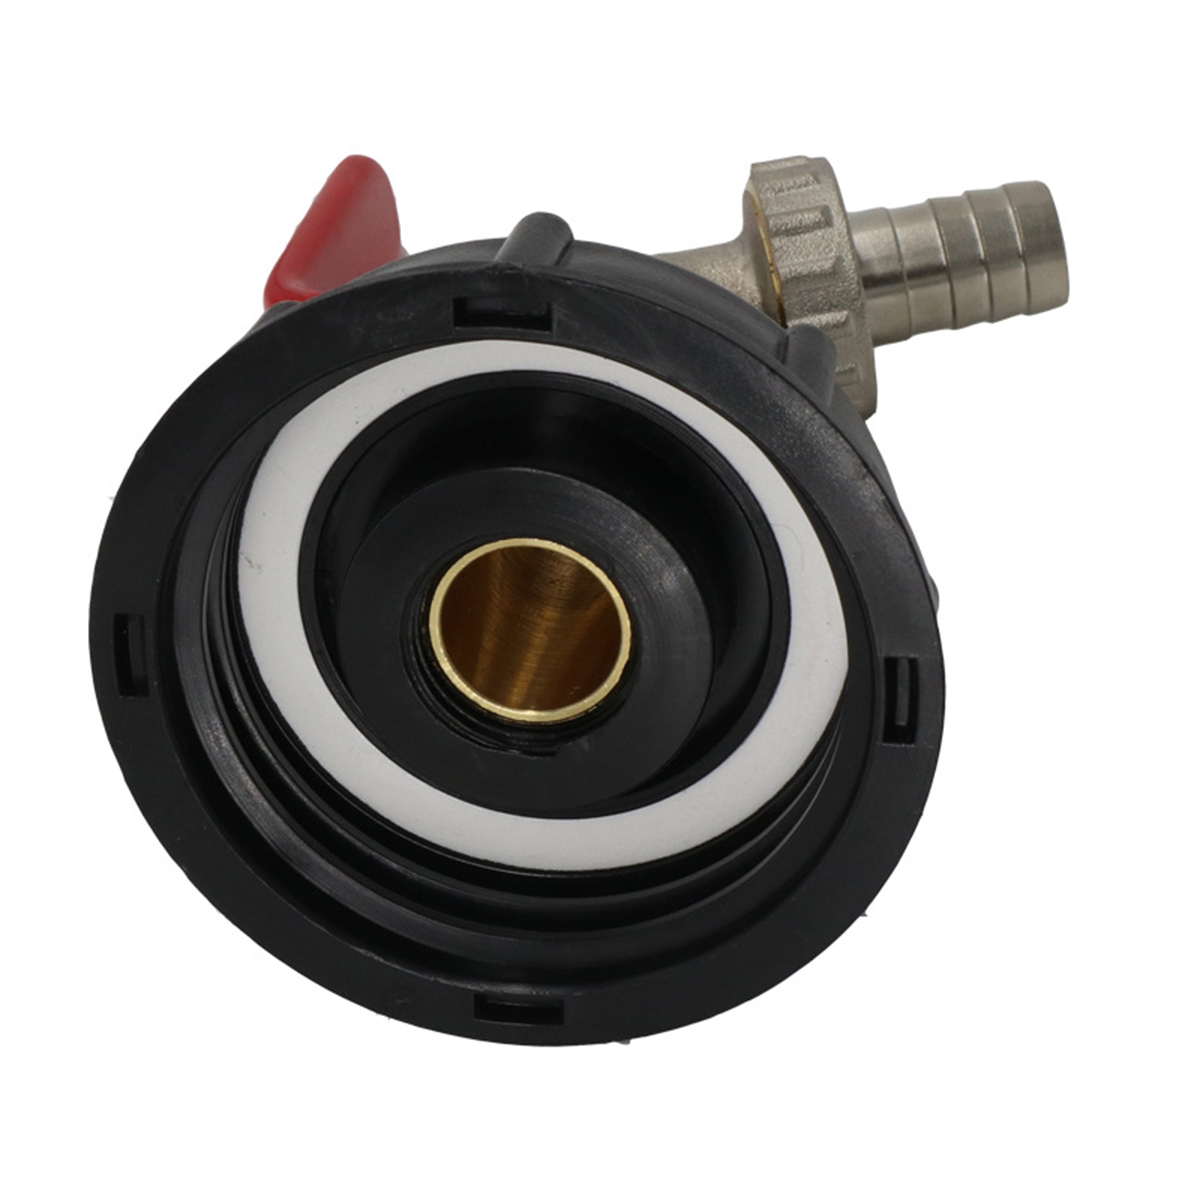 IBC-Tank-to-12quot-Yard-Garden-Water-Tap-Hose-Connector-Adapter-Fitting-Tool-S60X6-1753750